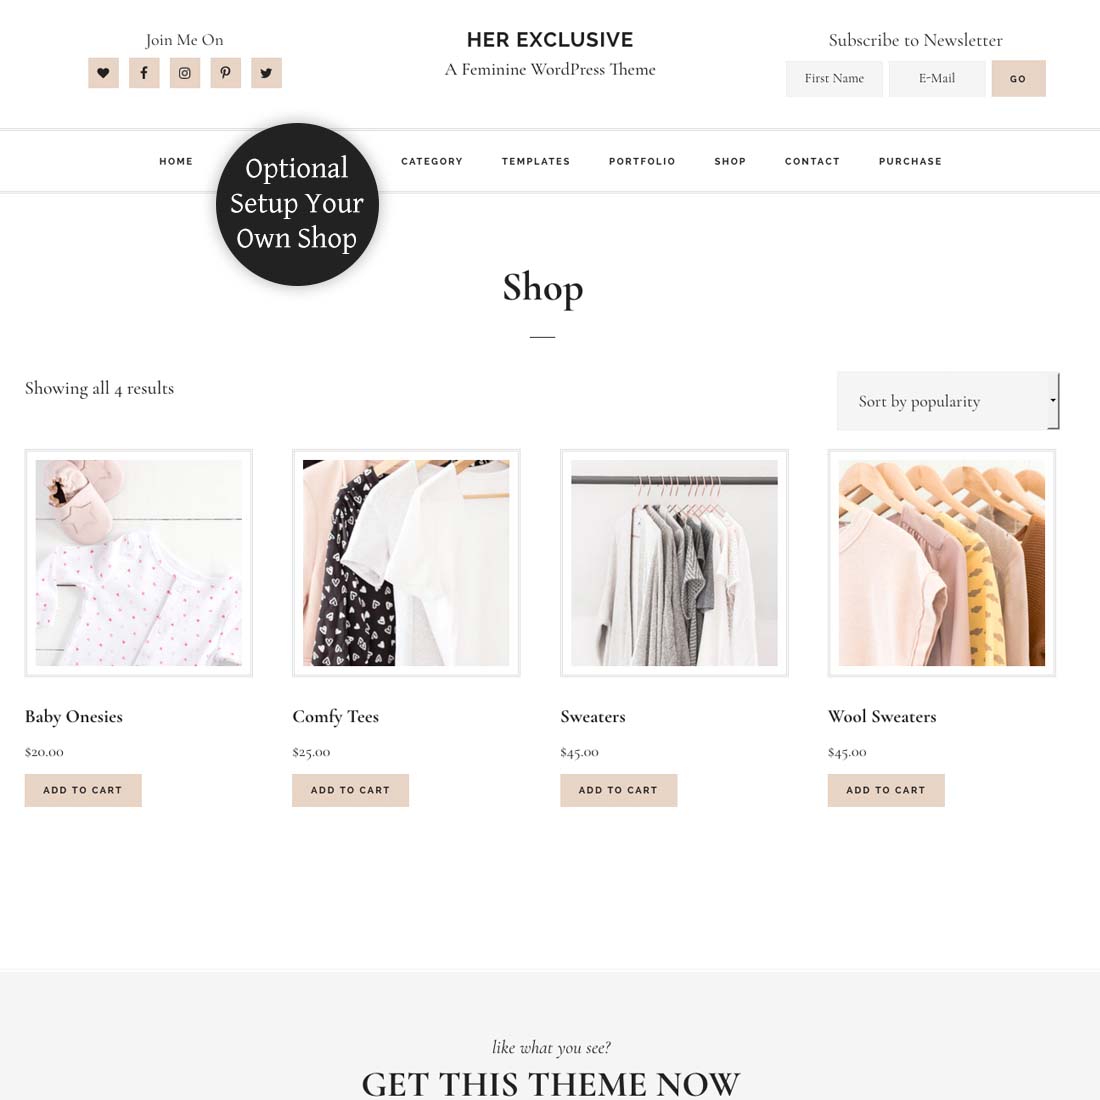 Her Exclusive WooCommerce Shop Page